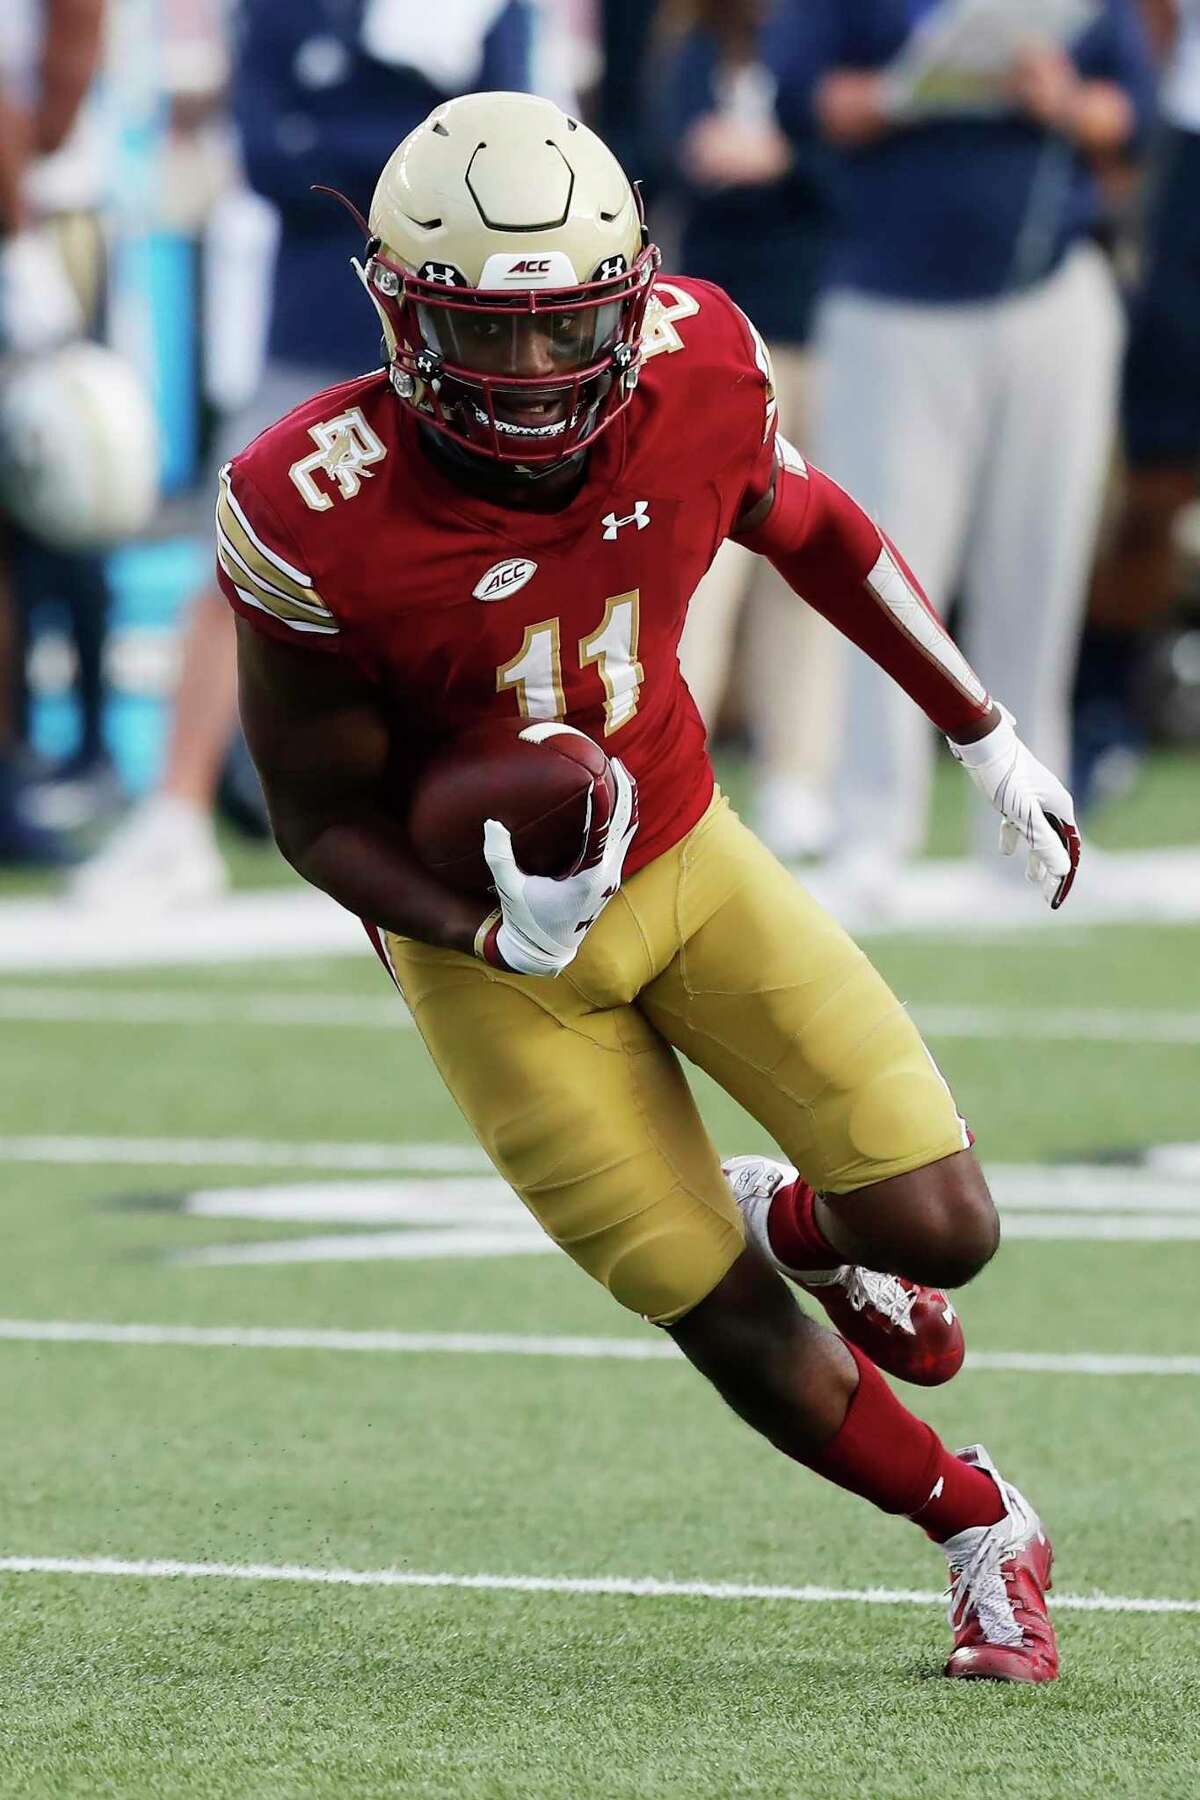 Boston College wide receiver CJ Lewis carries the ball during the first half of an NCAA college football game against Georgia Tech, Saturday, Oct. 24, 2020, in Boston. (AP Photo/Michael Dwyer)